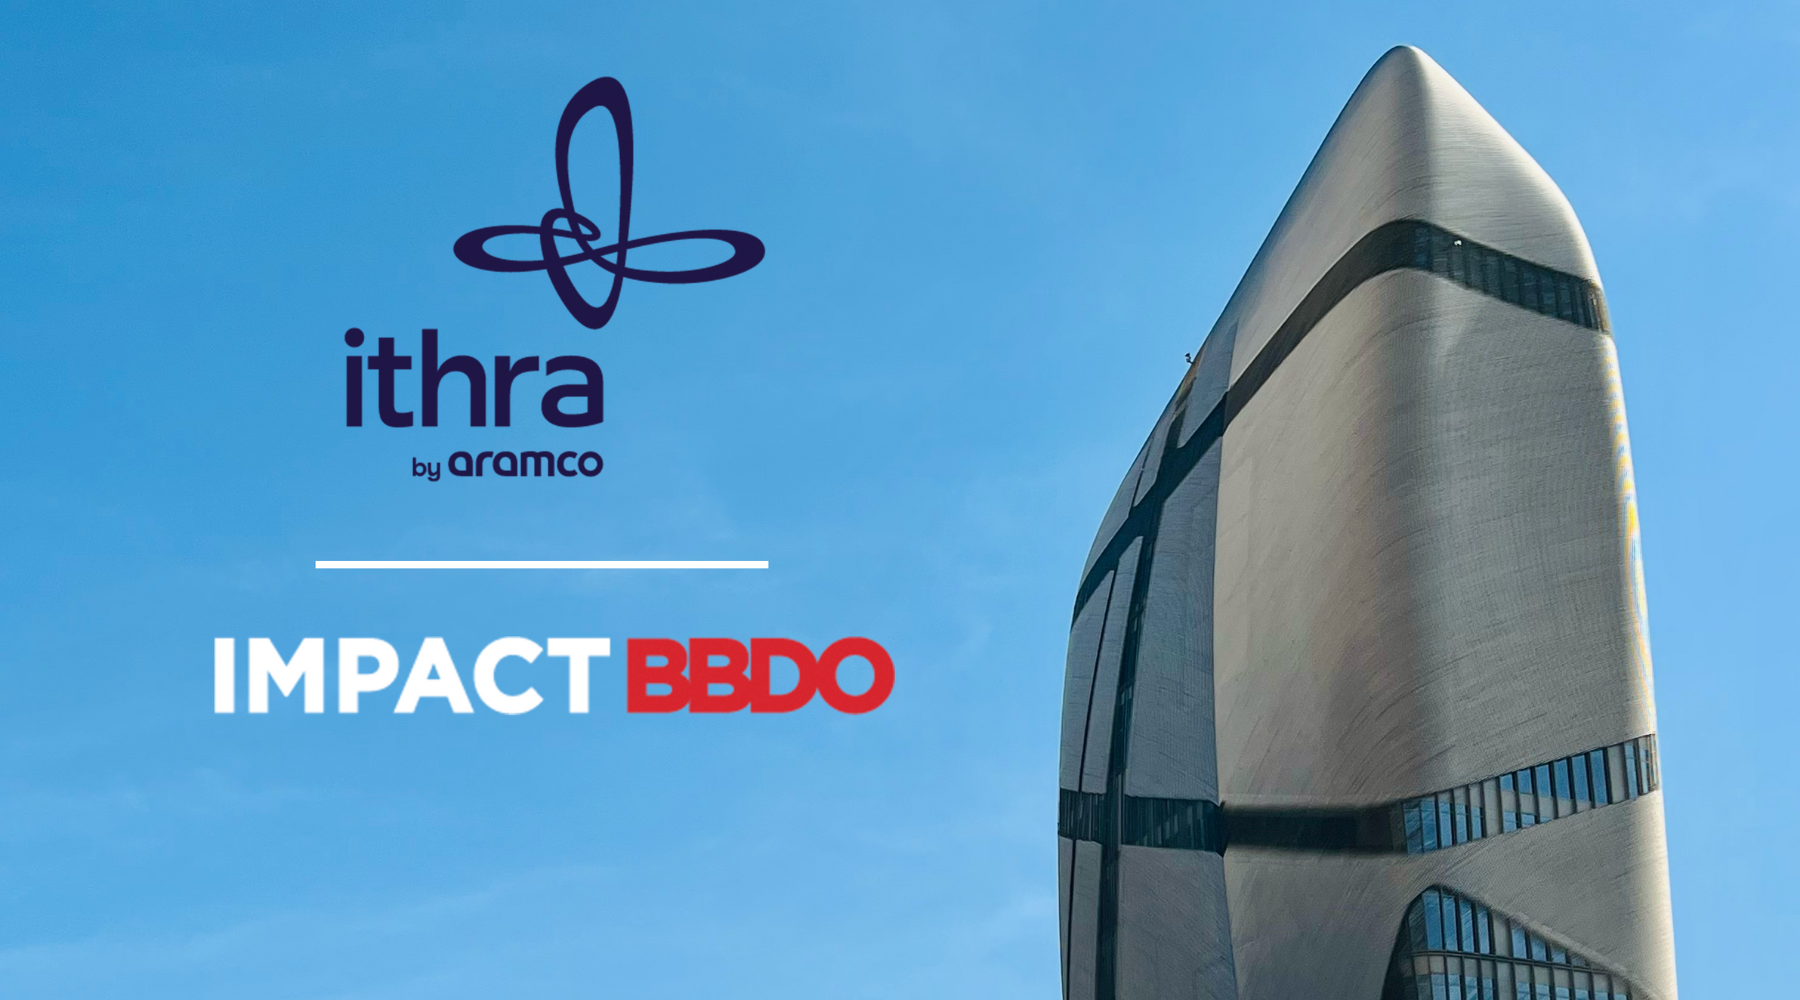 Ithra Appoints Impact BBDO as Creative Agency of Record